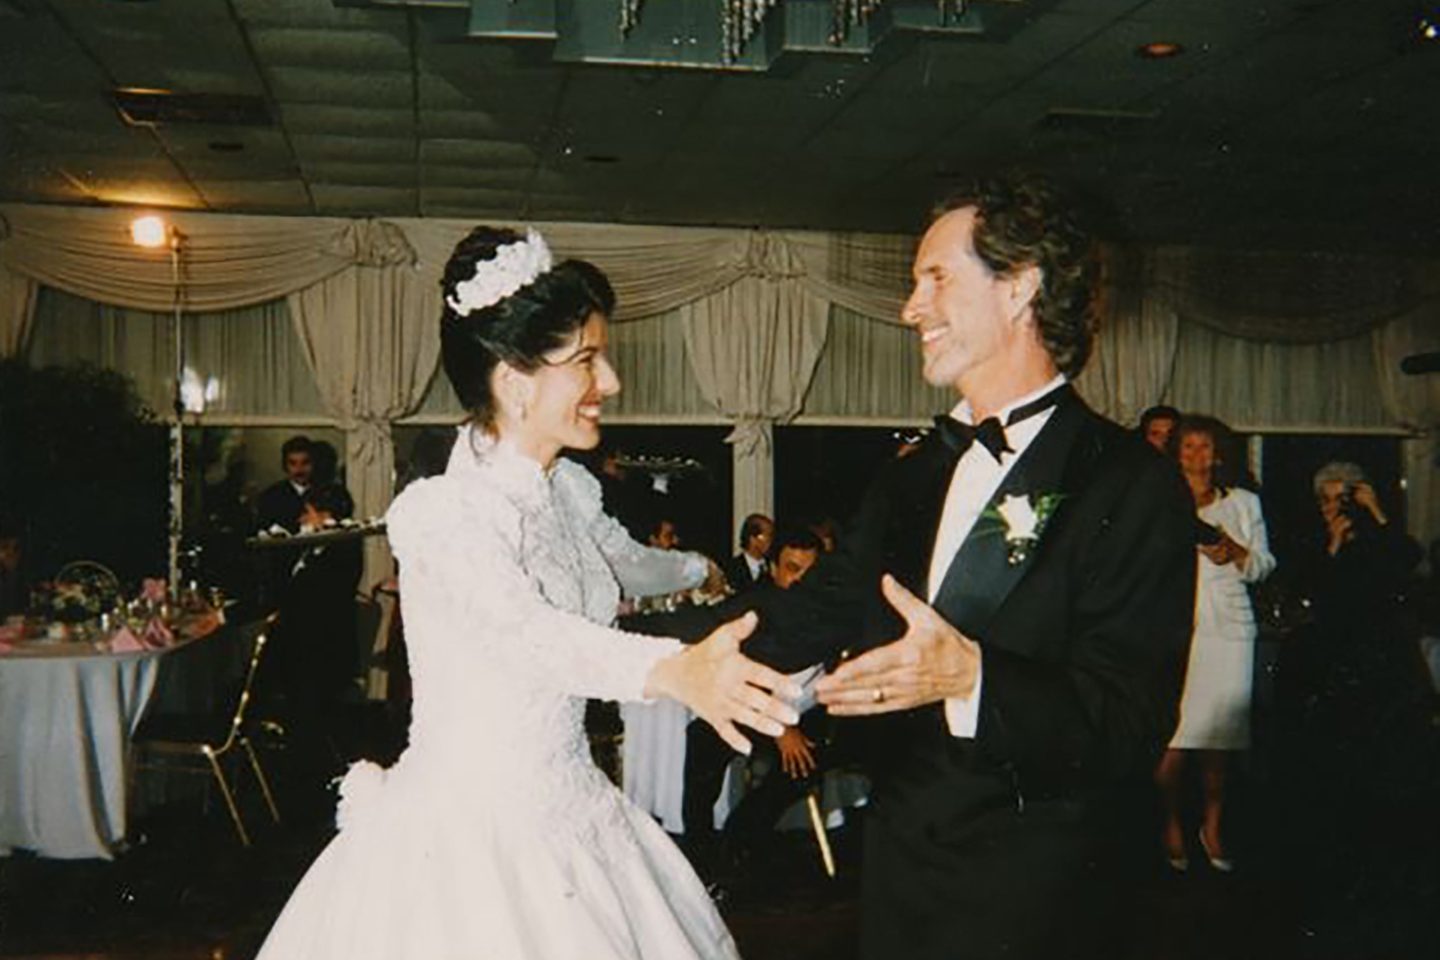 Wedding photo of man and woman dancing, smiling and facing each other